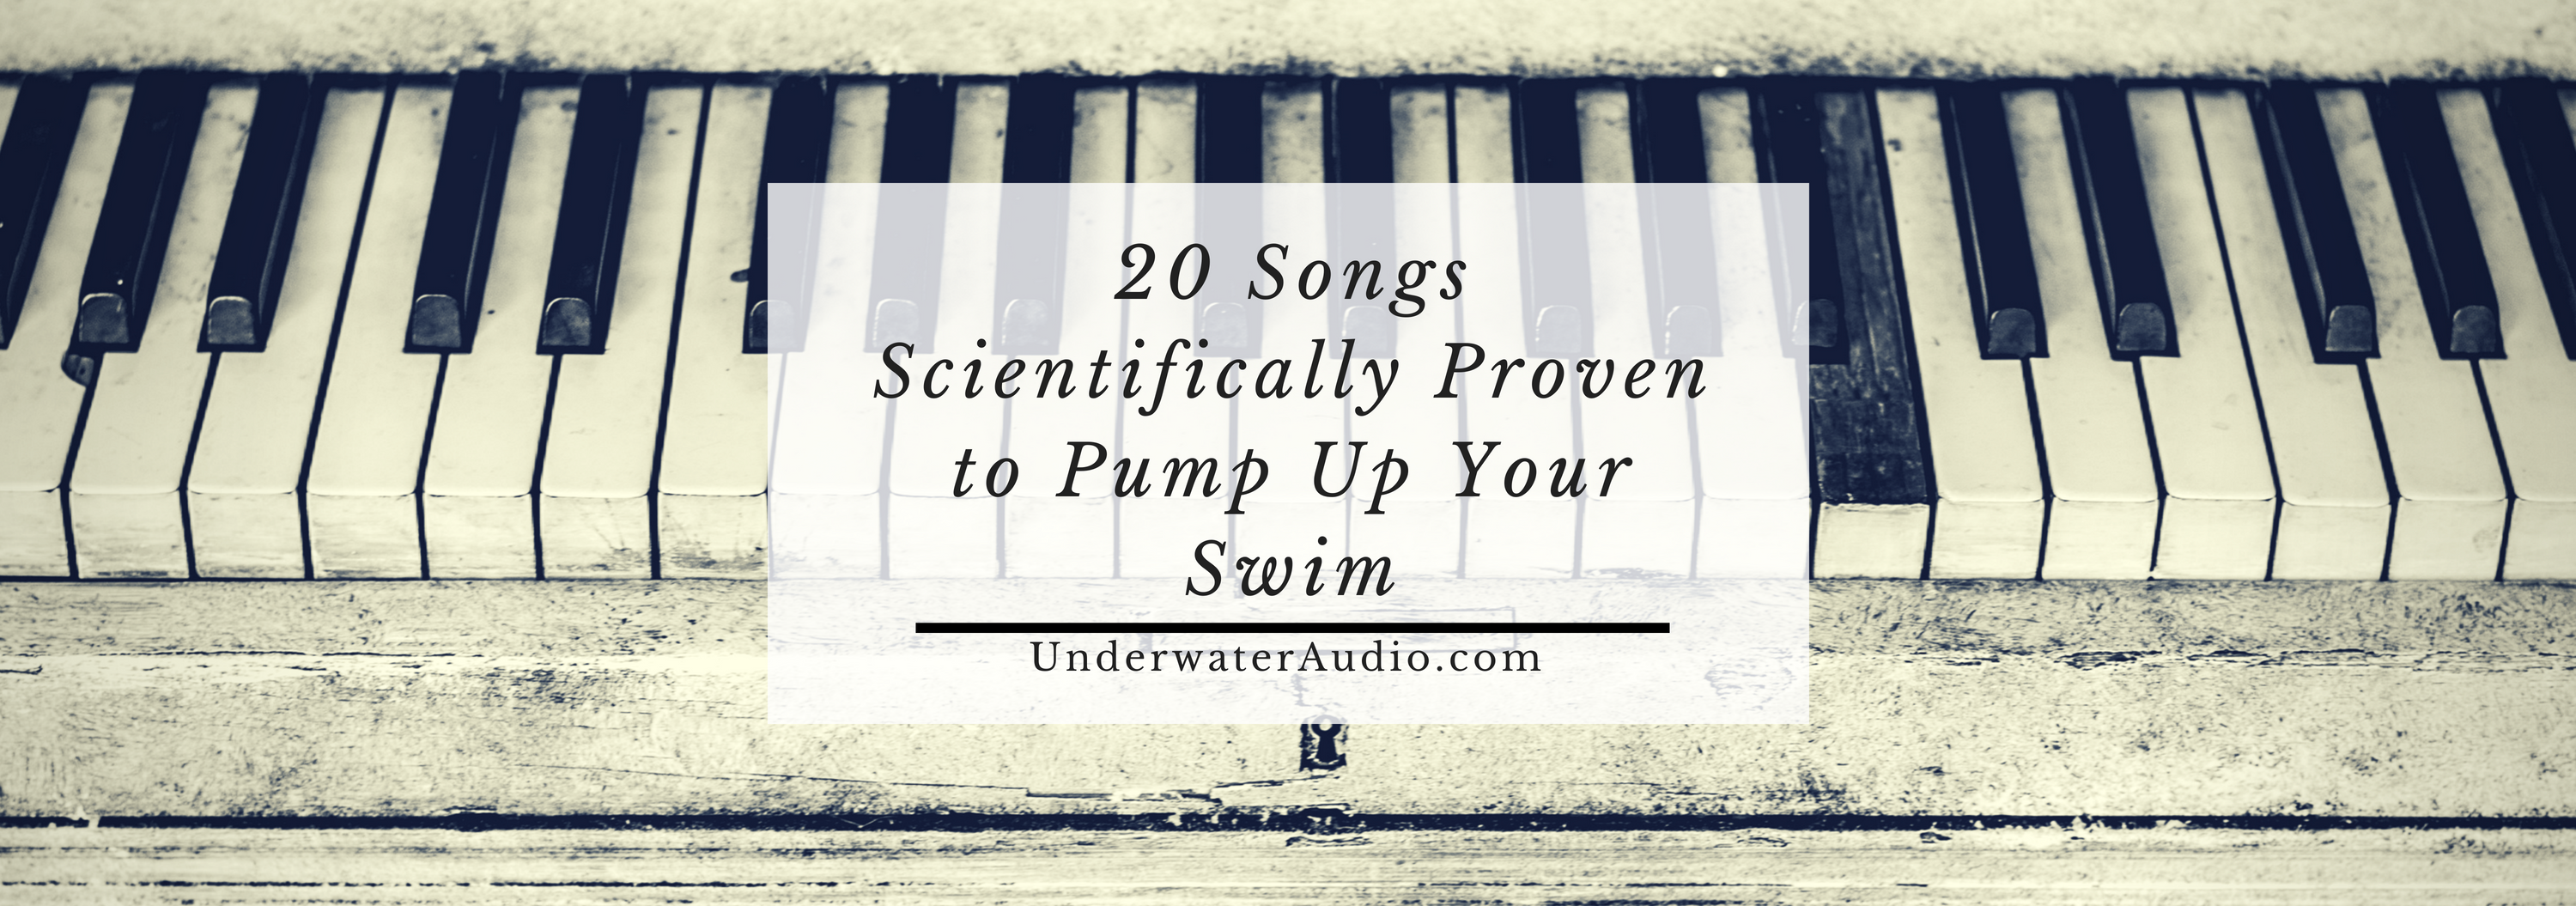 20 Songs Scientifically Proven to Pump Up Your Swim